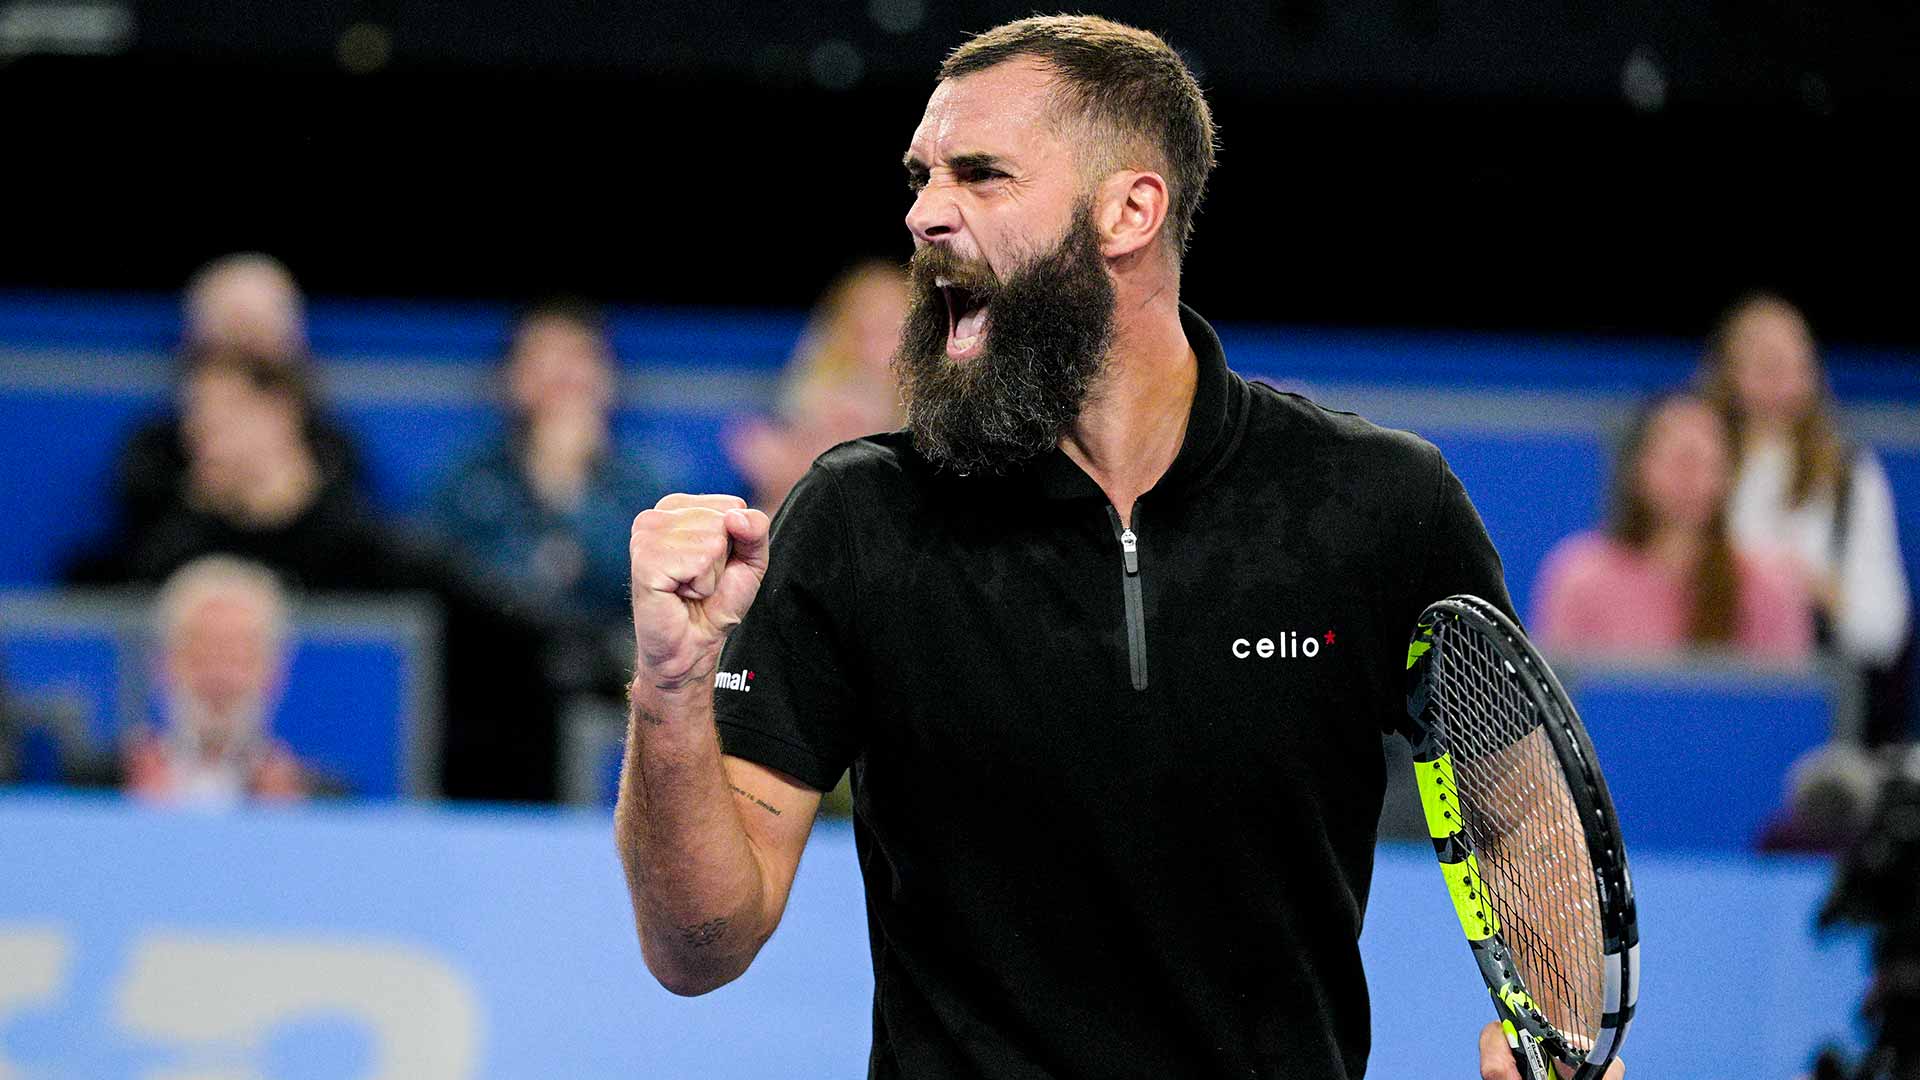 Benoit Paire defeats Andy Murray on Monday in Montpellier.